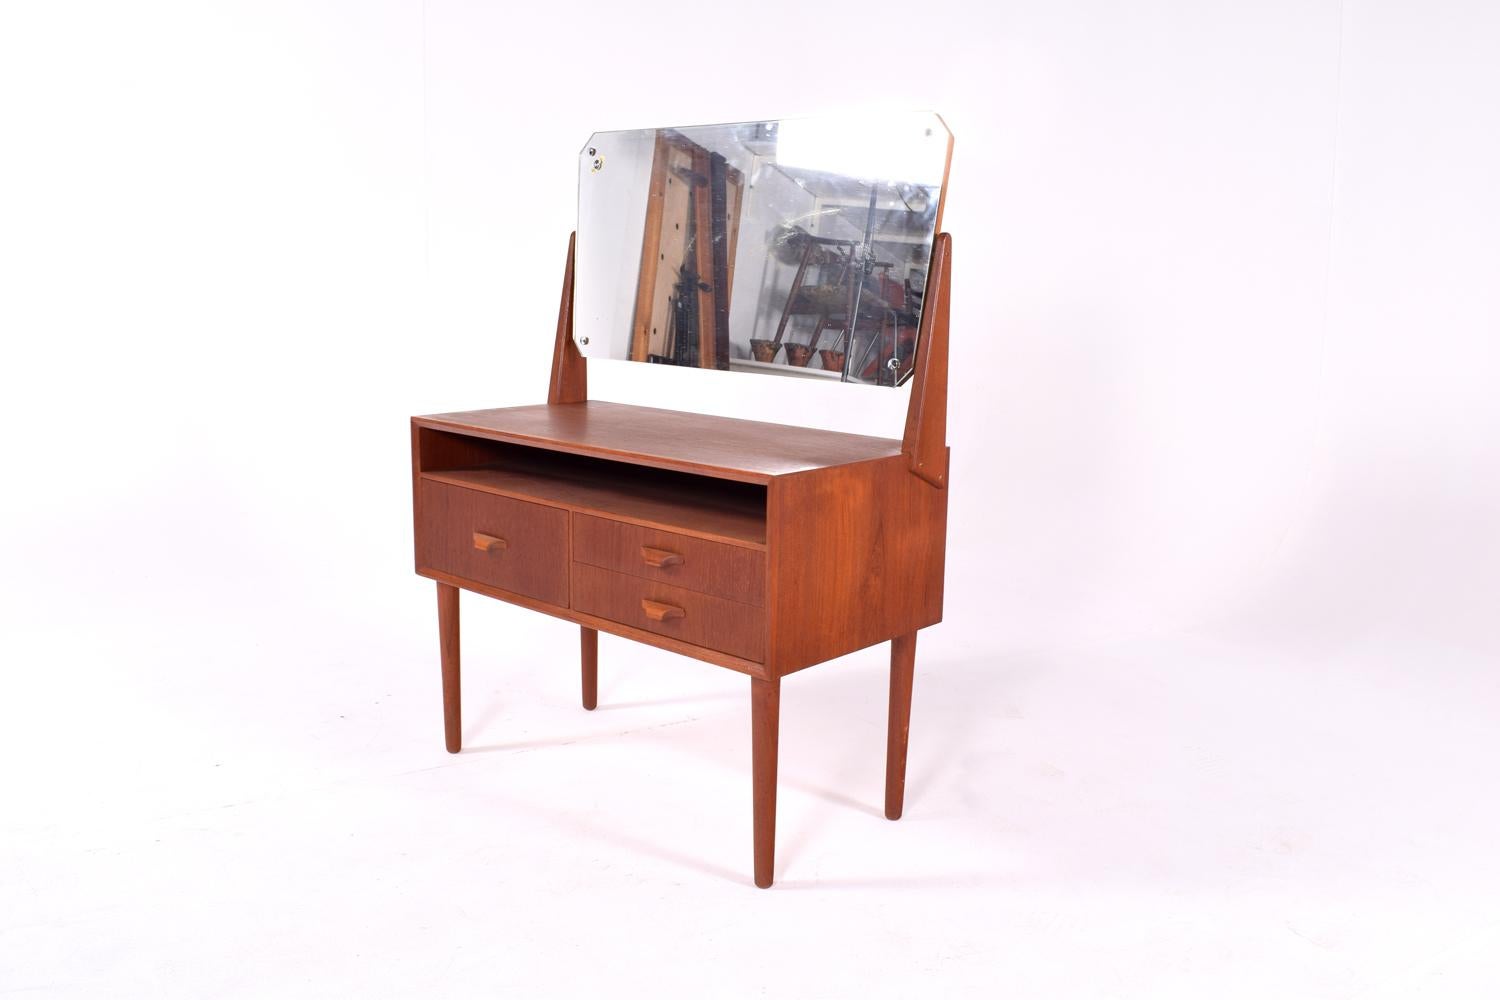 Danish teak dressing table with large mirror. The dressing table was made in the 1960s and has a nice elegant and slim design. The large mirror is tiltable. The dressing table has 3 drawers and a shelf.